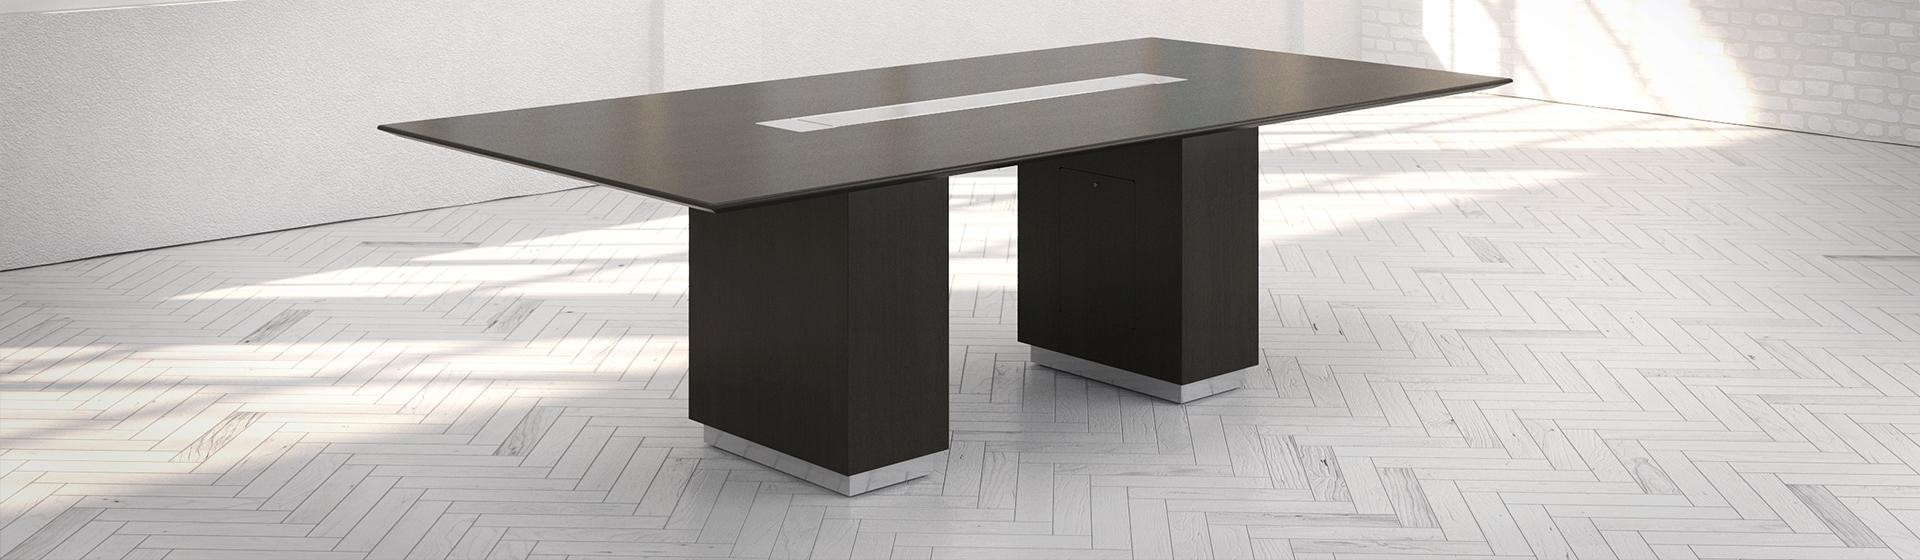 Tailgate table in a boardroom with dark woodgrain finish